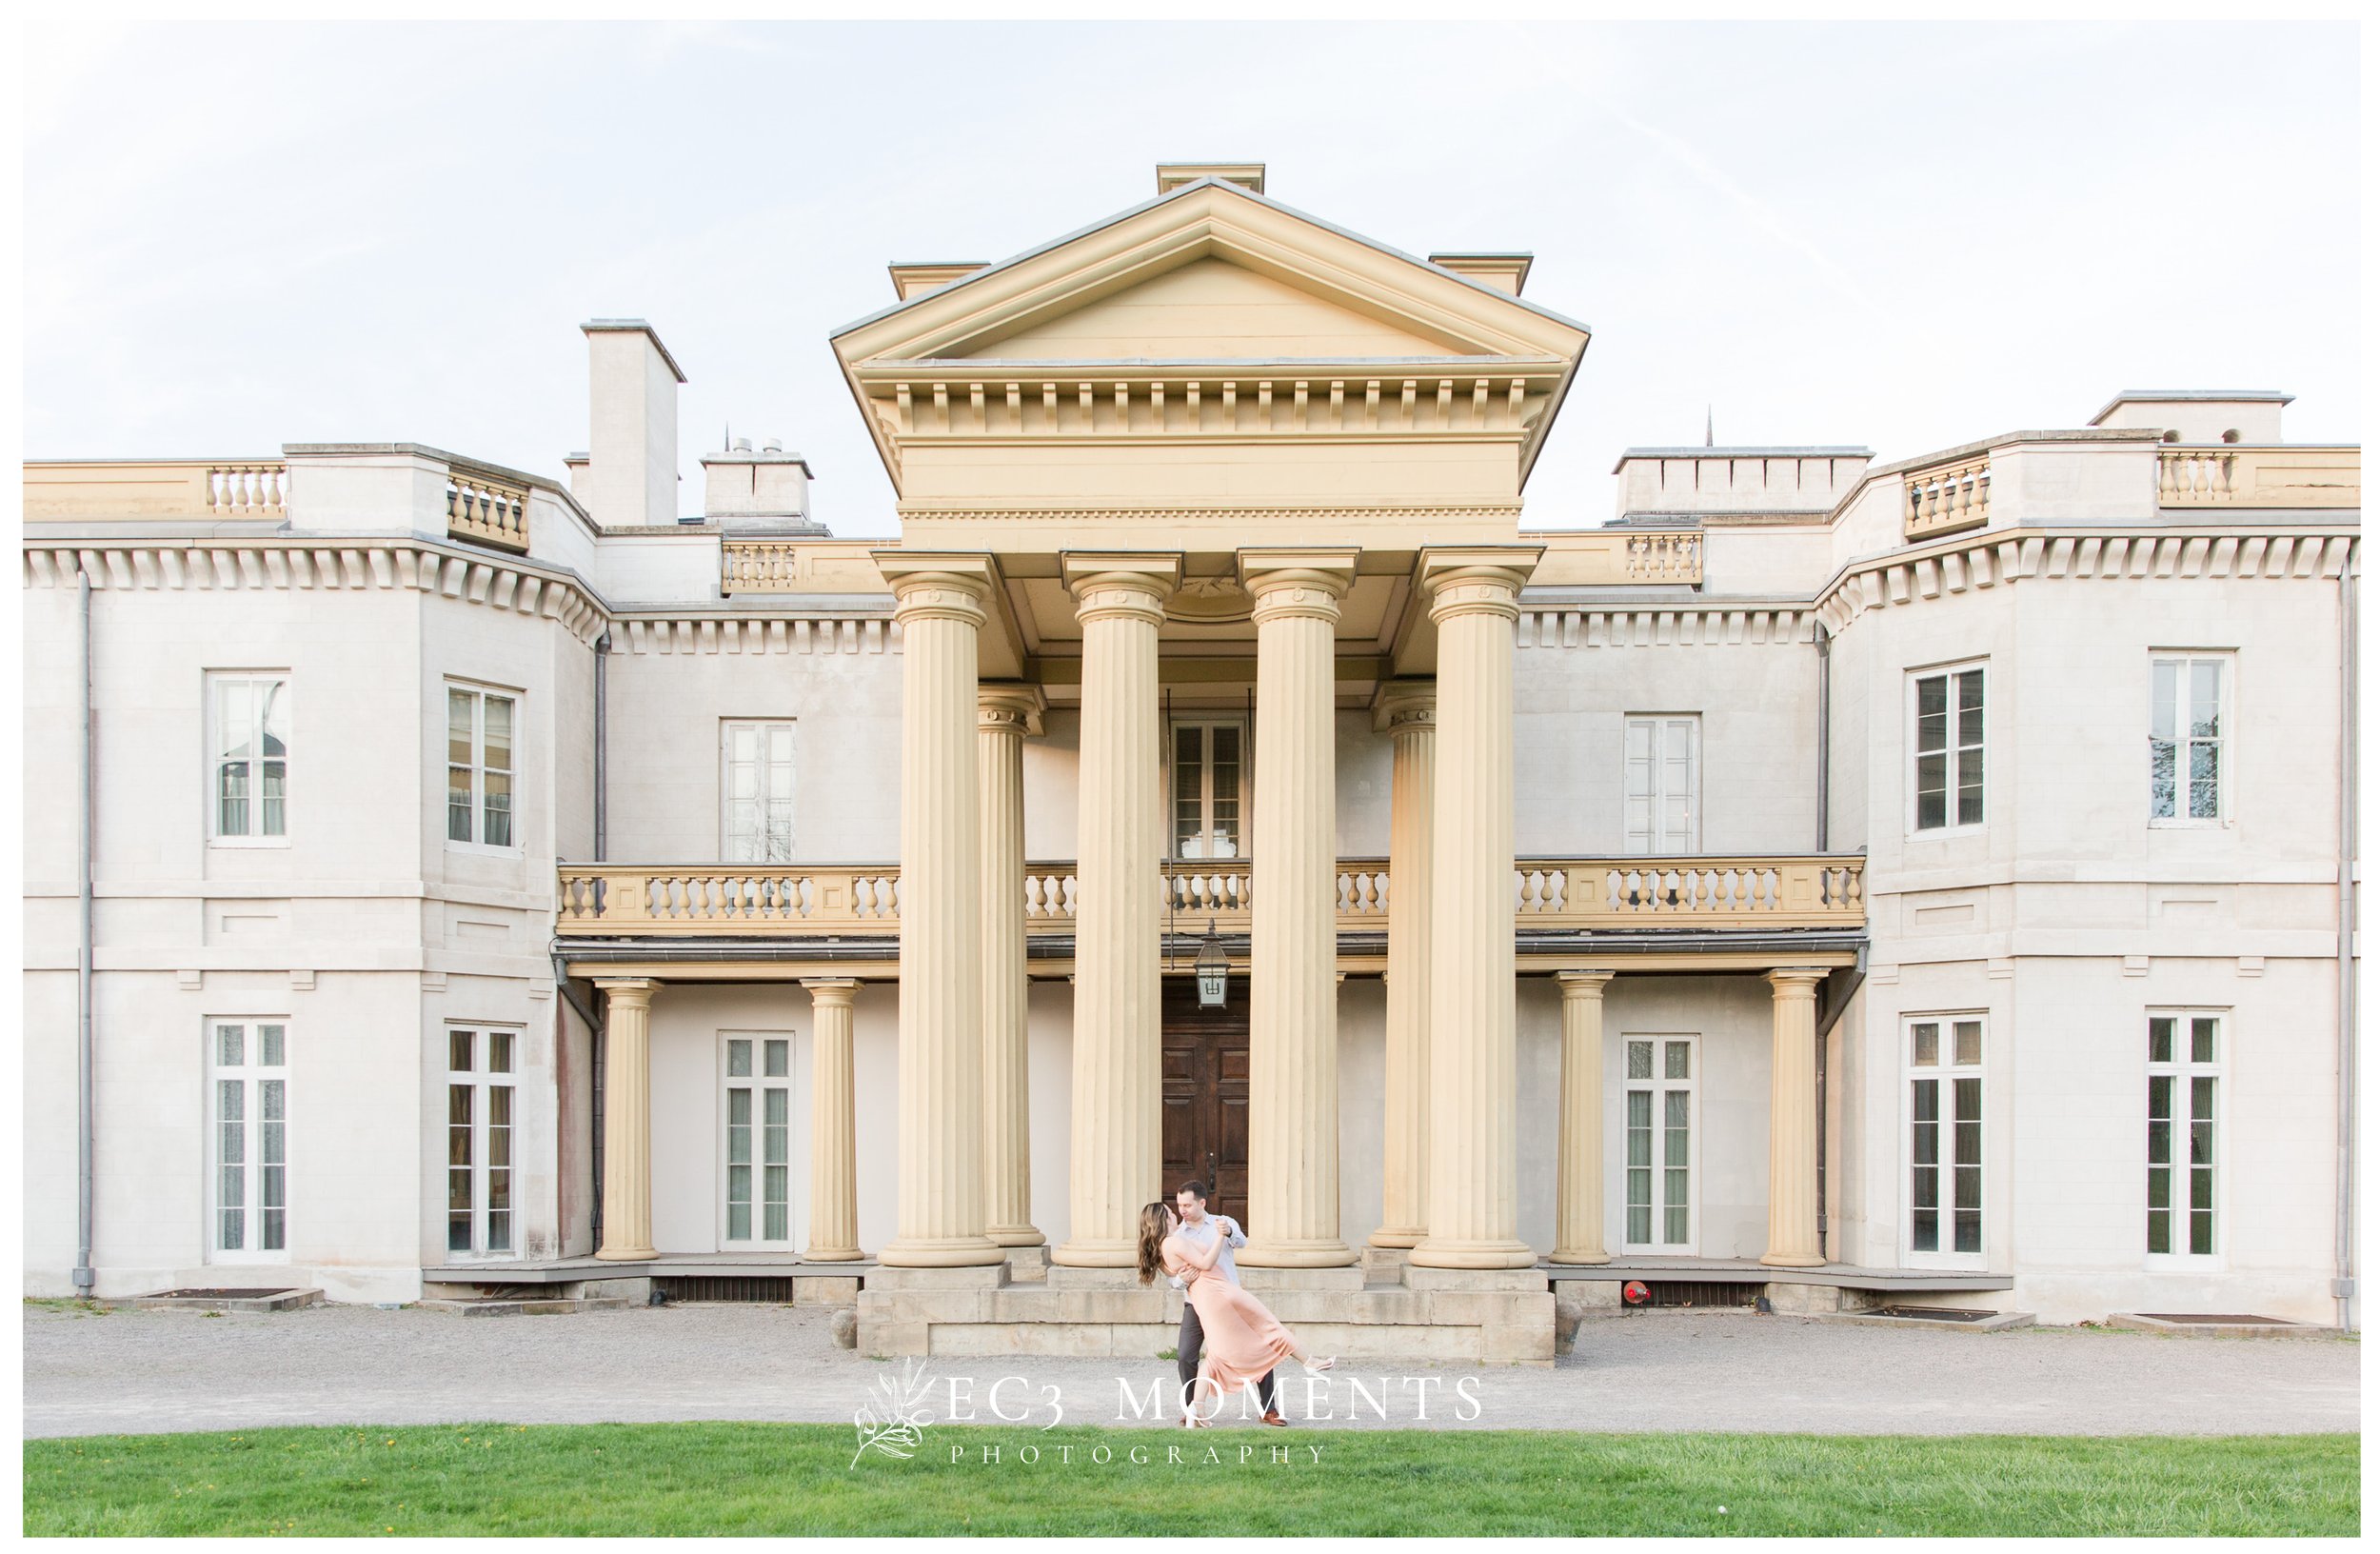  Captured at Dundurn Castle by EC3 Moments 